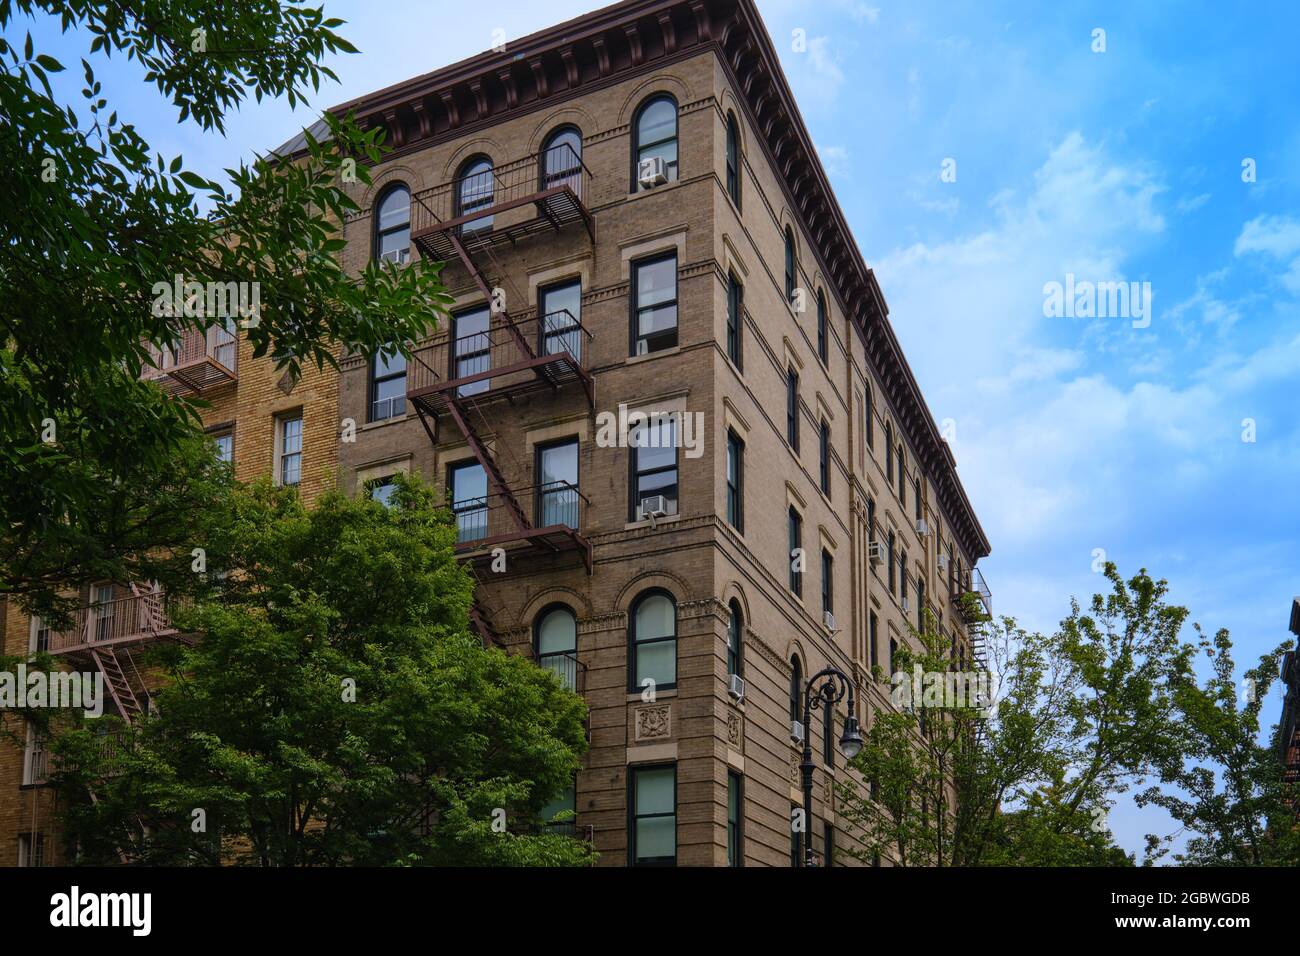 Building from Friends series in Manhattan, New York City Stock Photo